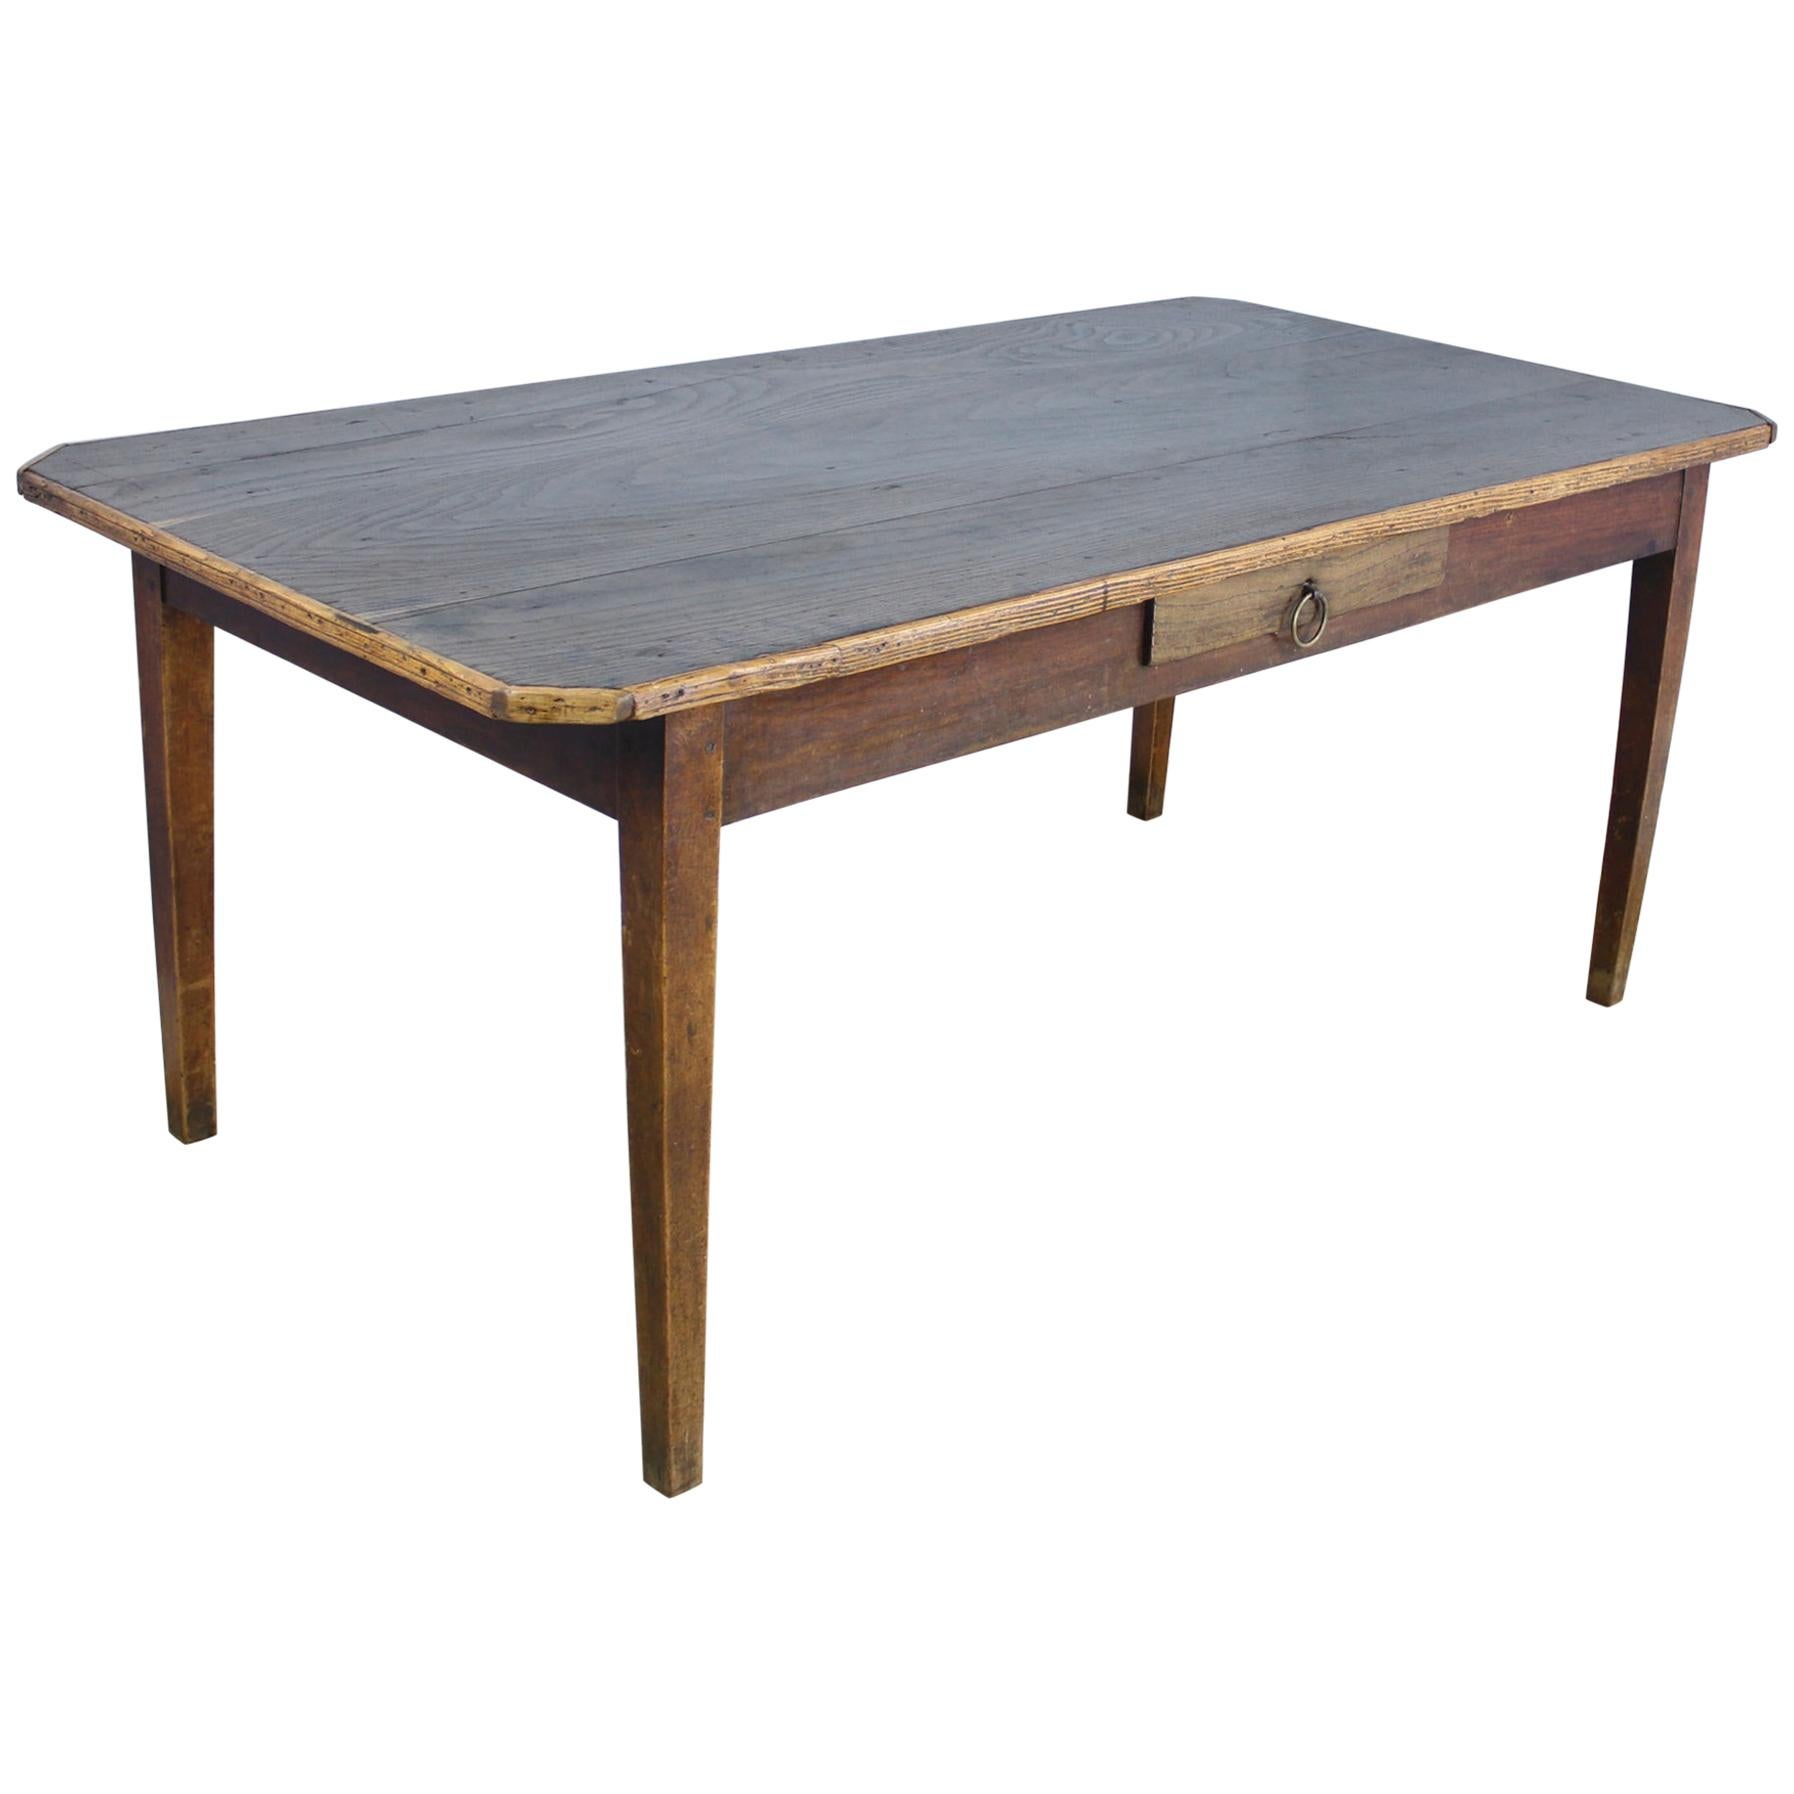 Chestnut Farm Table with Canted Corners and Decorative Edge